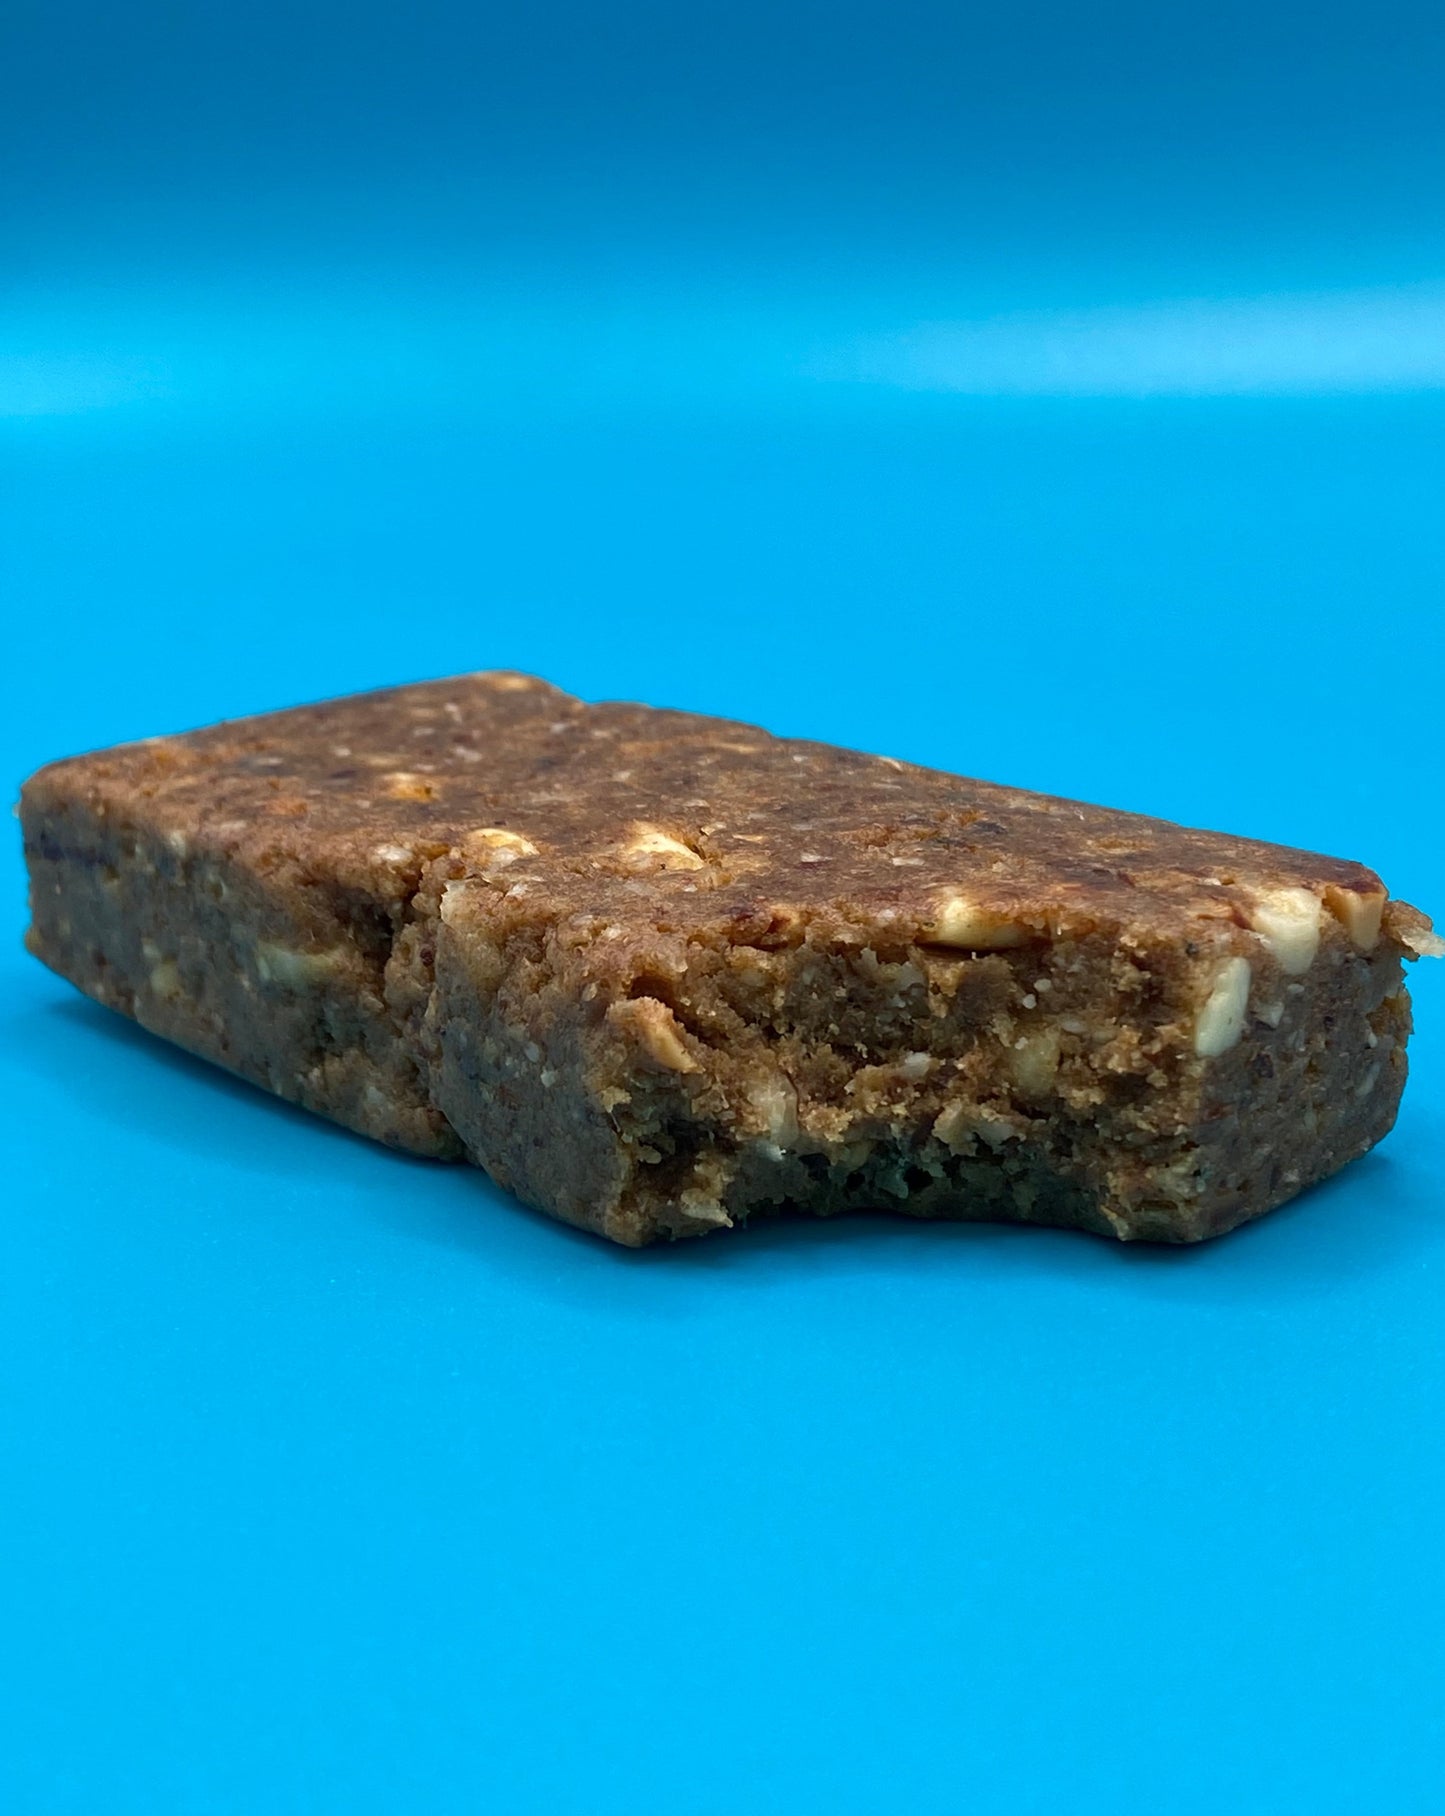 An almond coconut TIROBAR, a vegan and all natural protein bar, is shown bitten with coconut flakes and almonds visible in the filling. The bar is placed against a blue background.